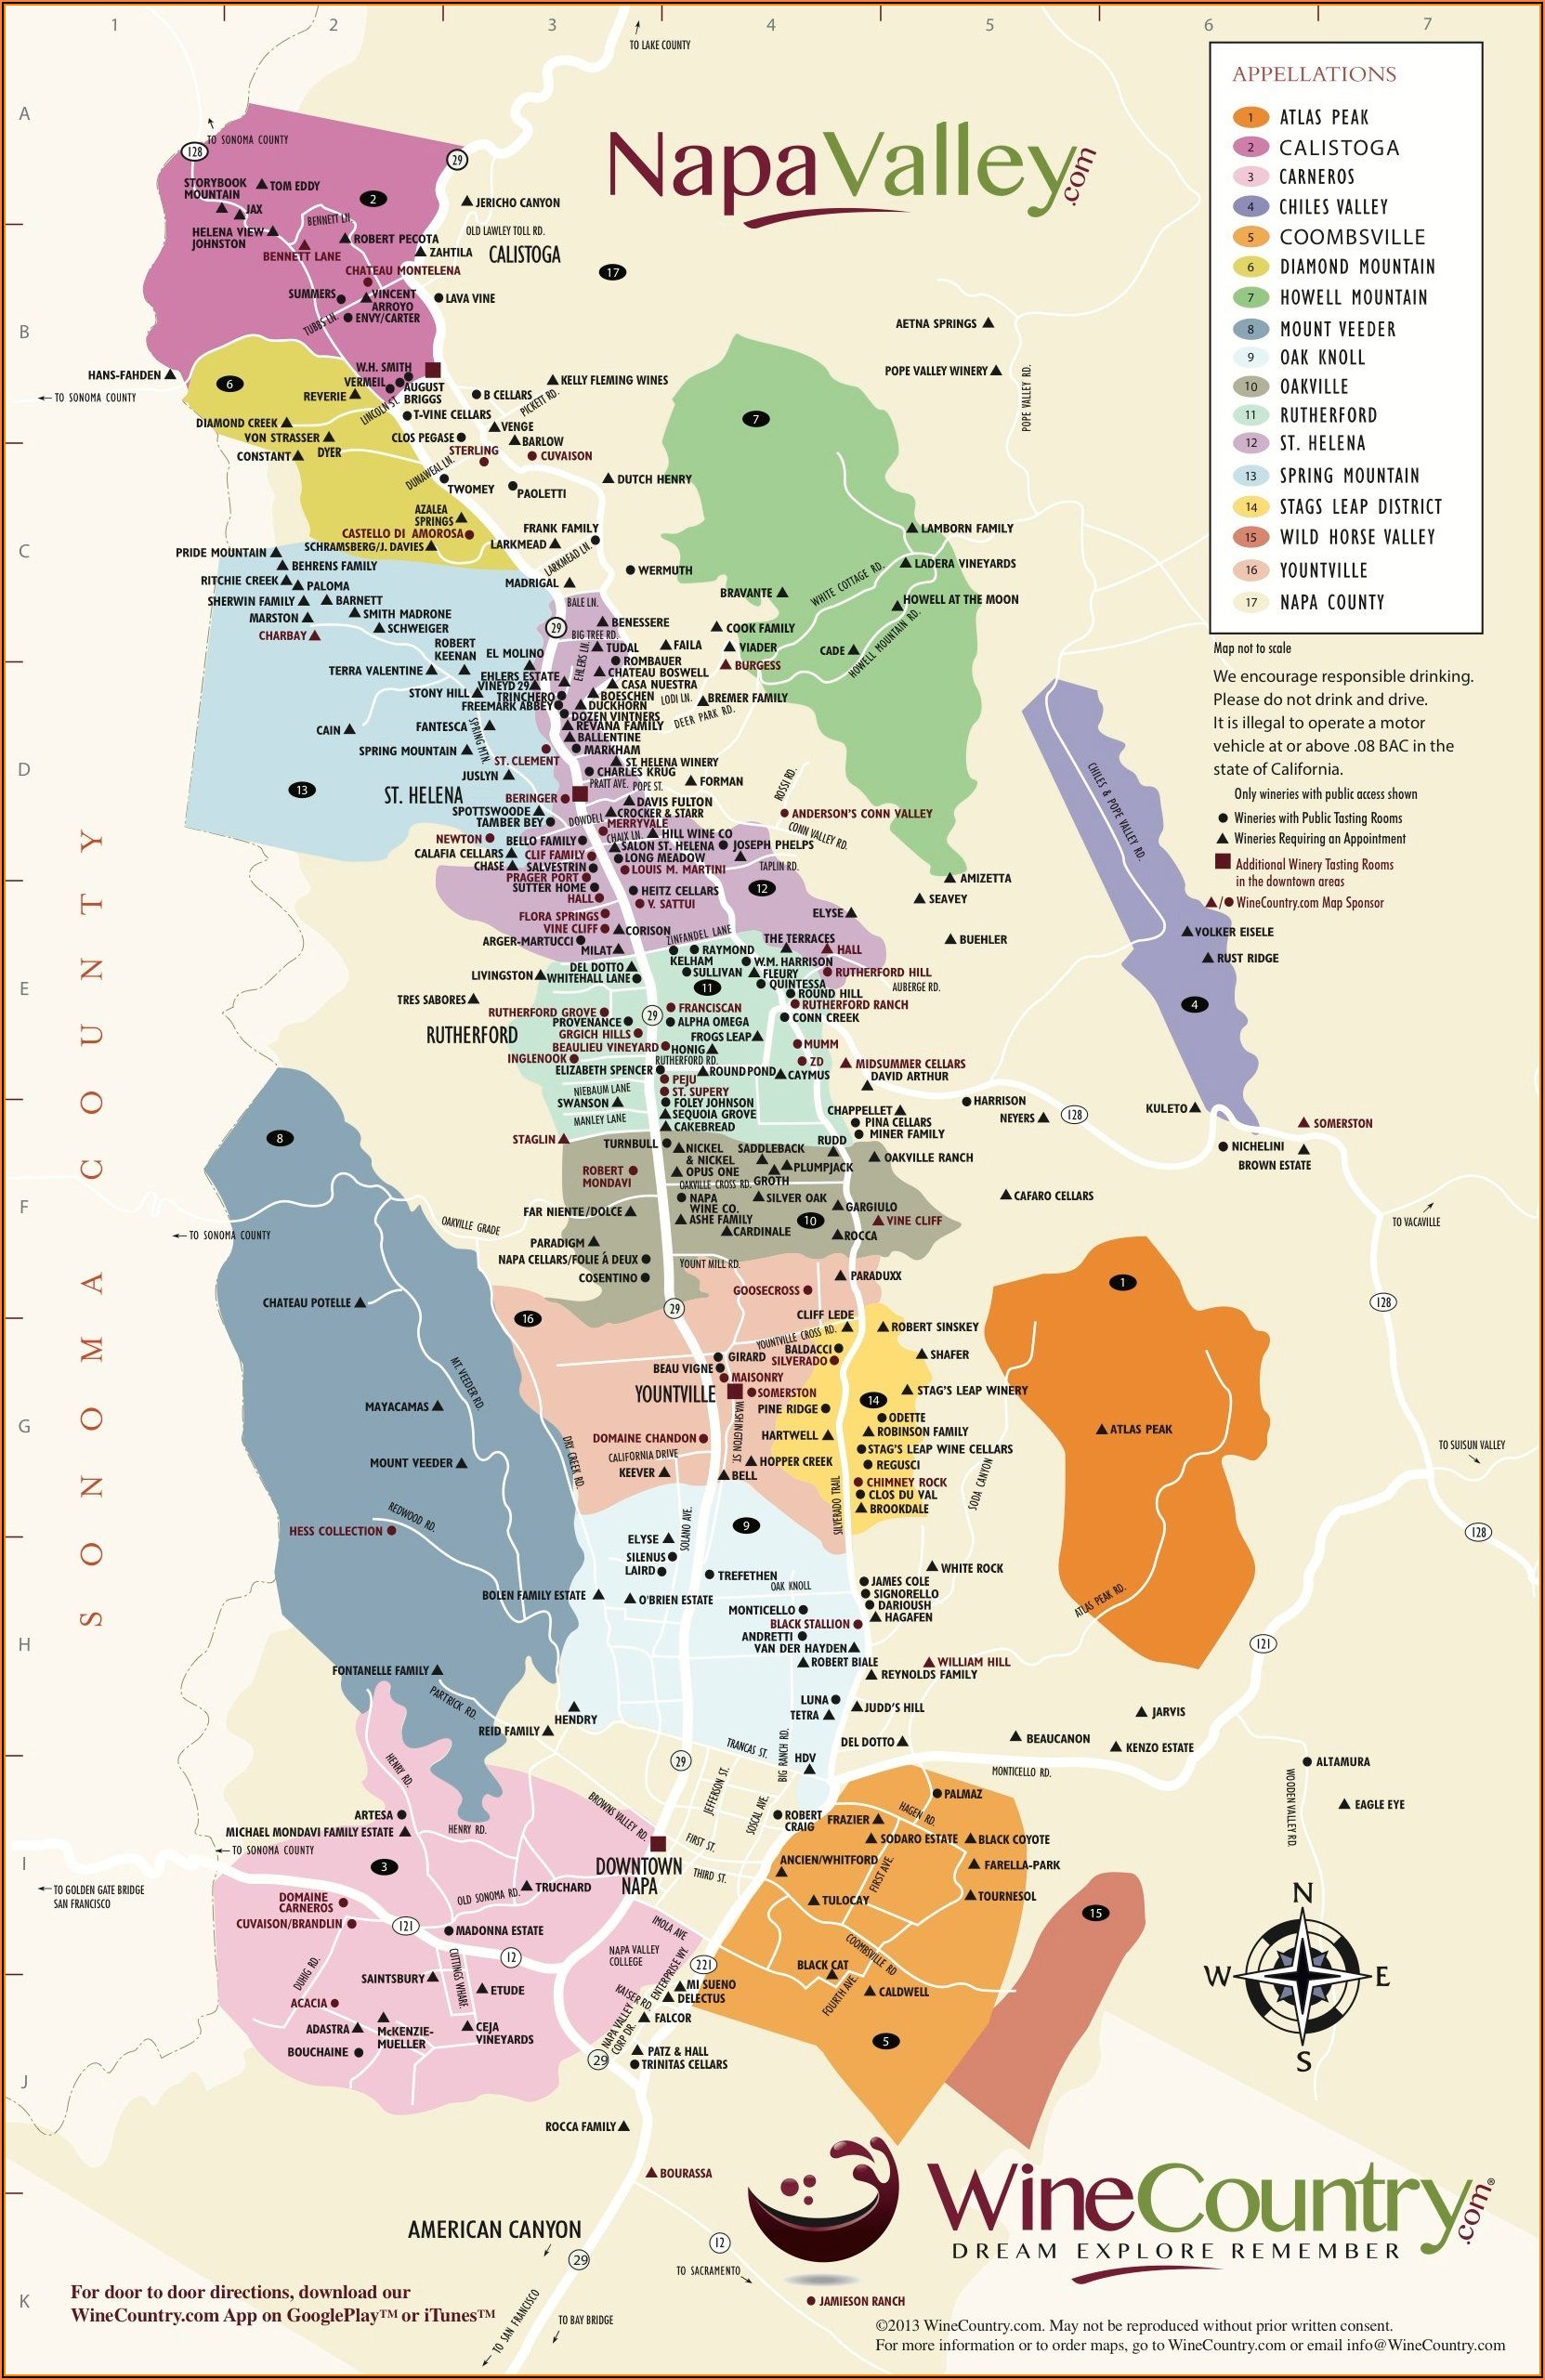 Maps Of Napa Valley Wineries